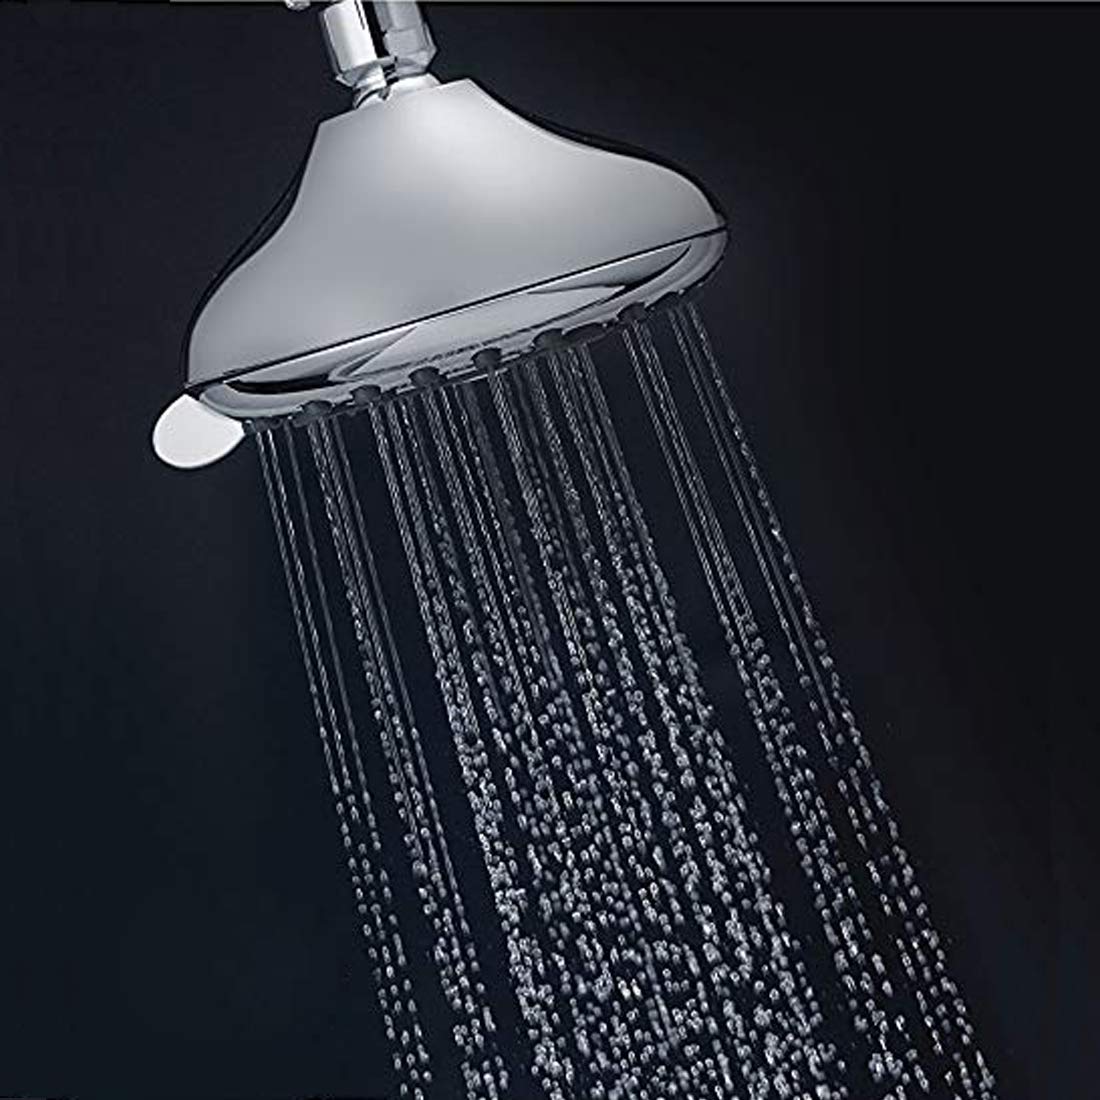 MS-5D135-SA-001 Overhead mist shower with 6 function spray settings with shower arm and flange